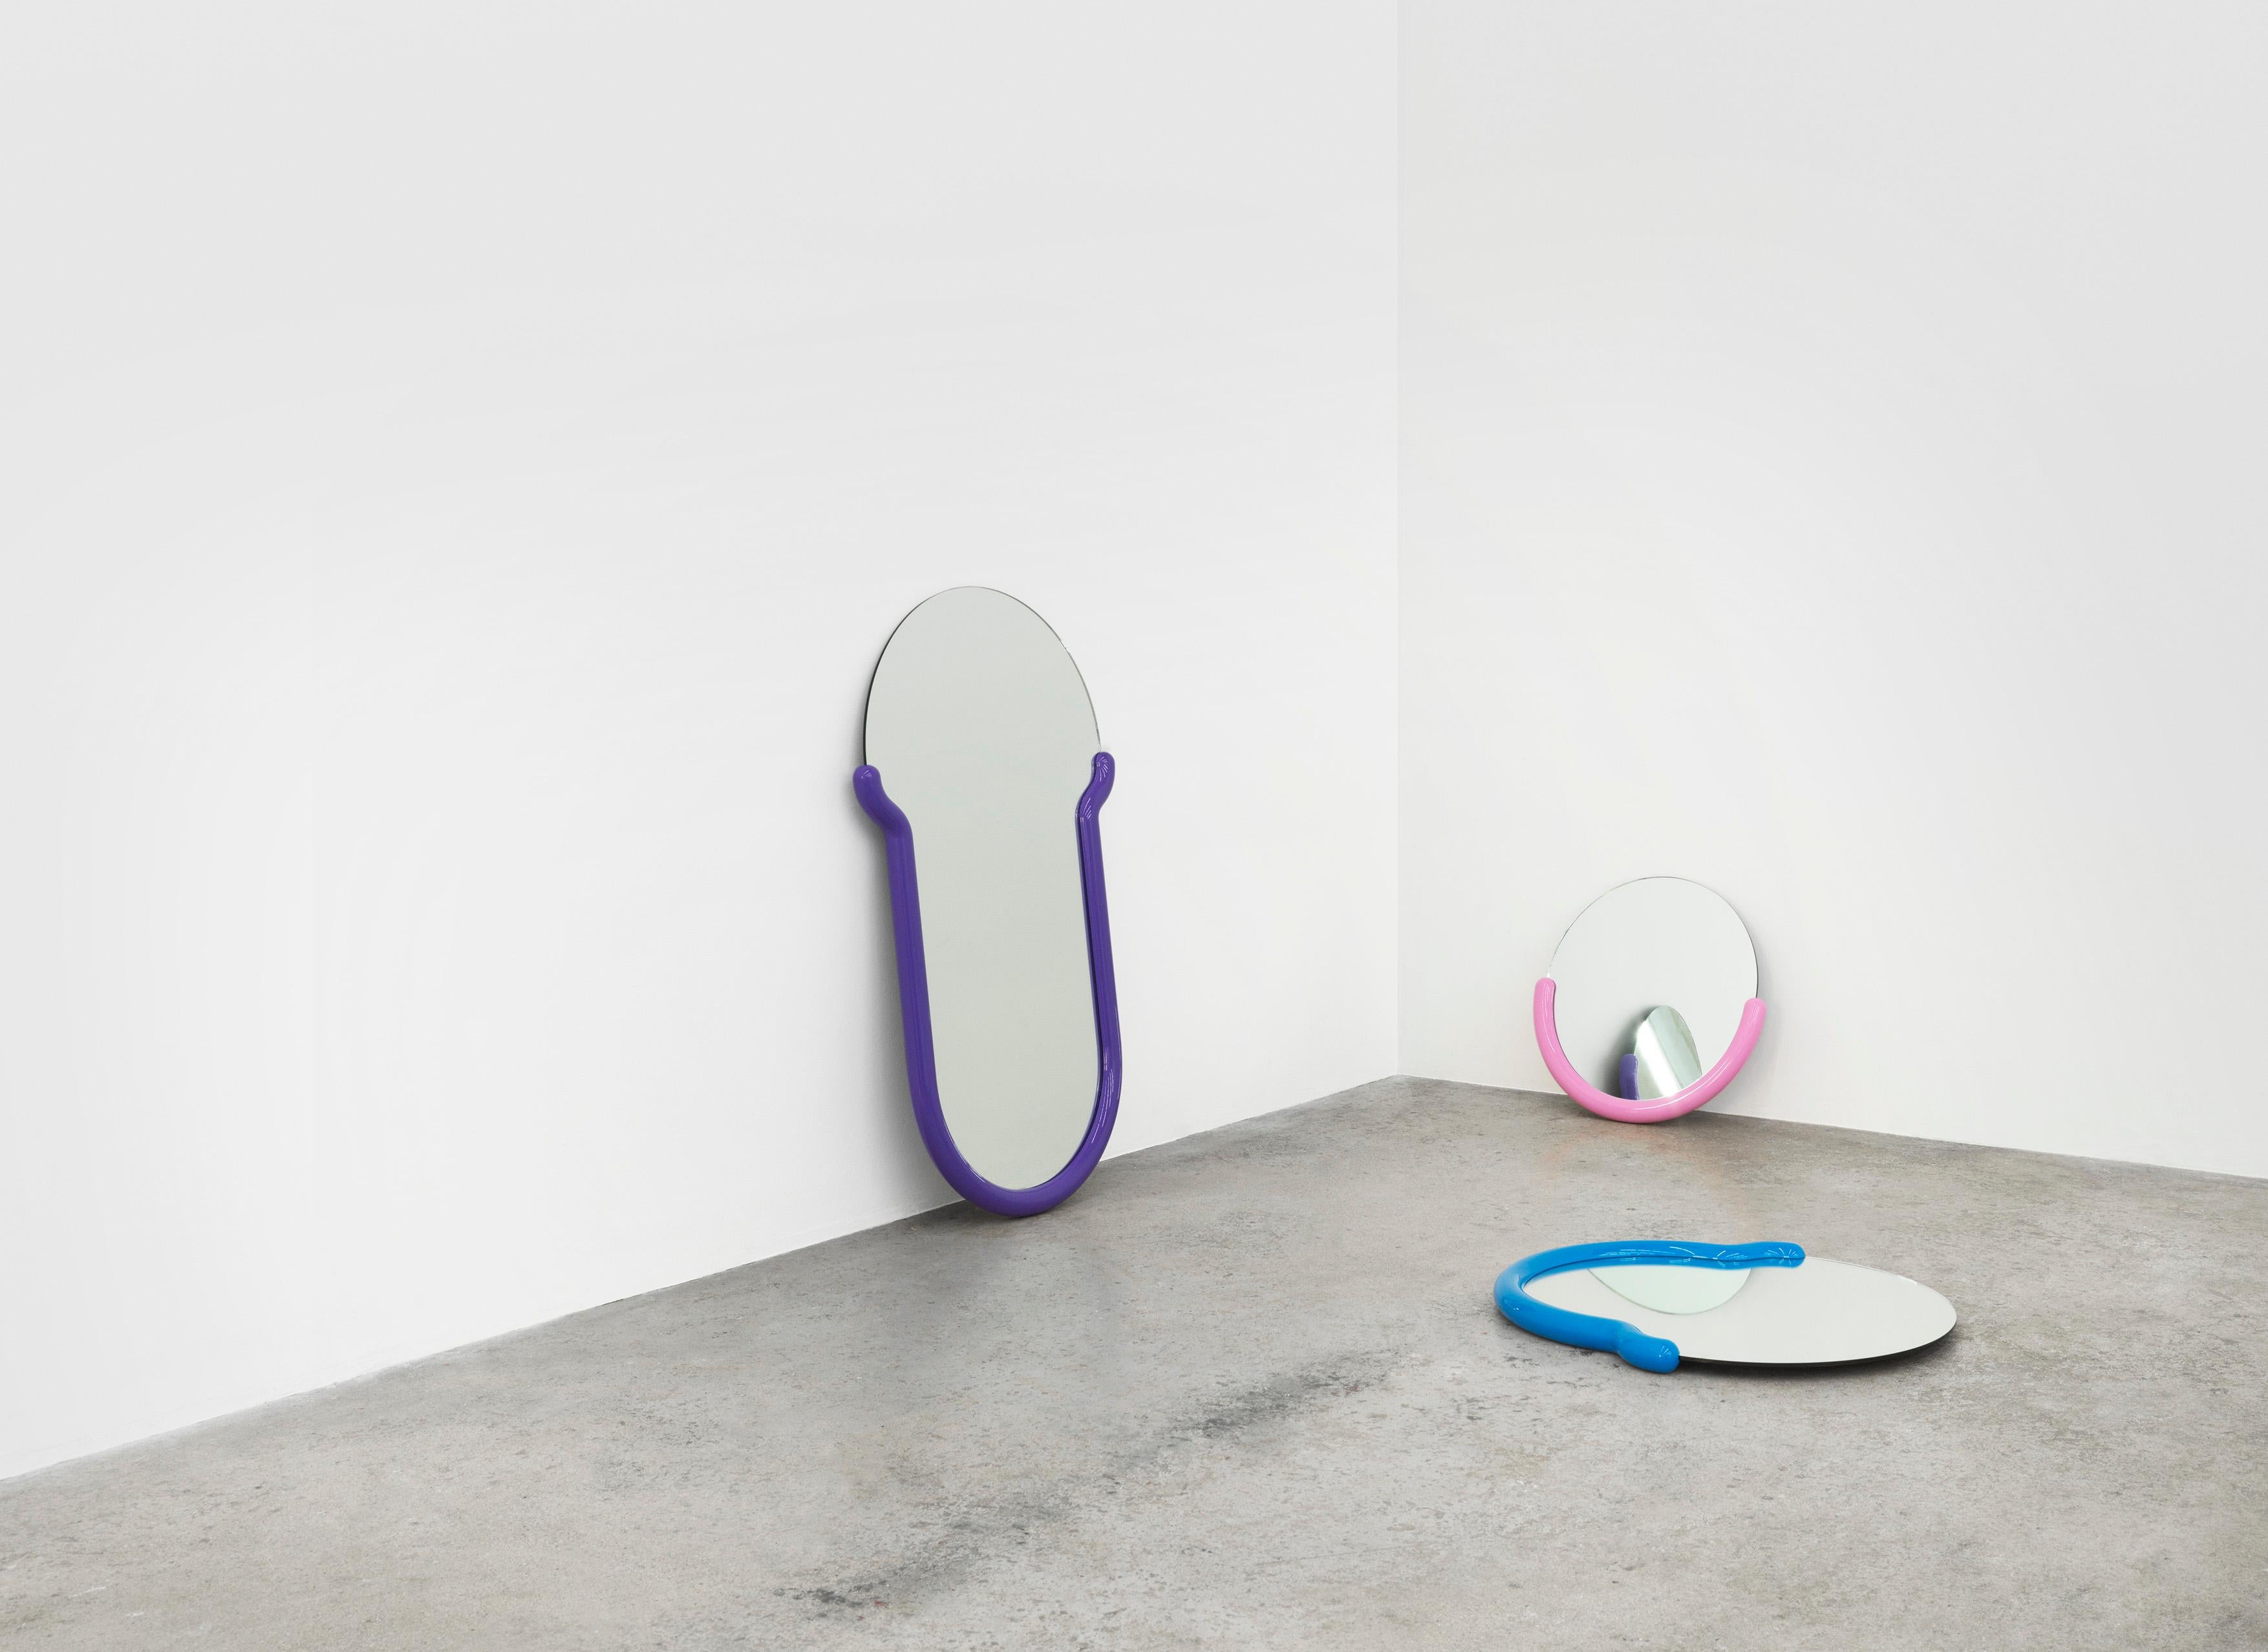 Loud minimalist expressions and electric colors fuse in Greg Bogin’s abstract mirrors for the Normann x Brask Art Collection, creating objects that straddle the boundary between painting and functional object. His raison d’être is to contribute to